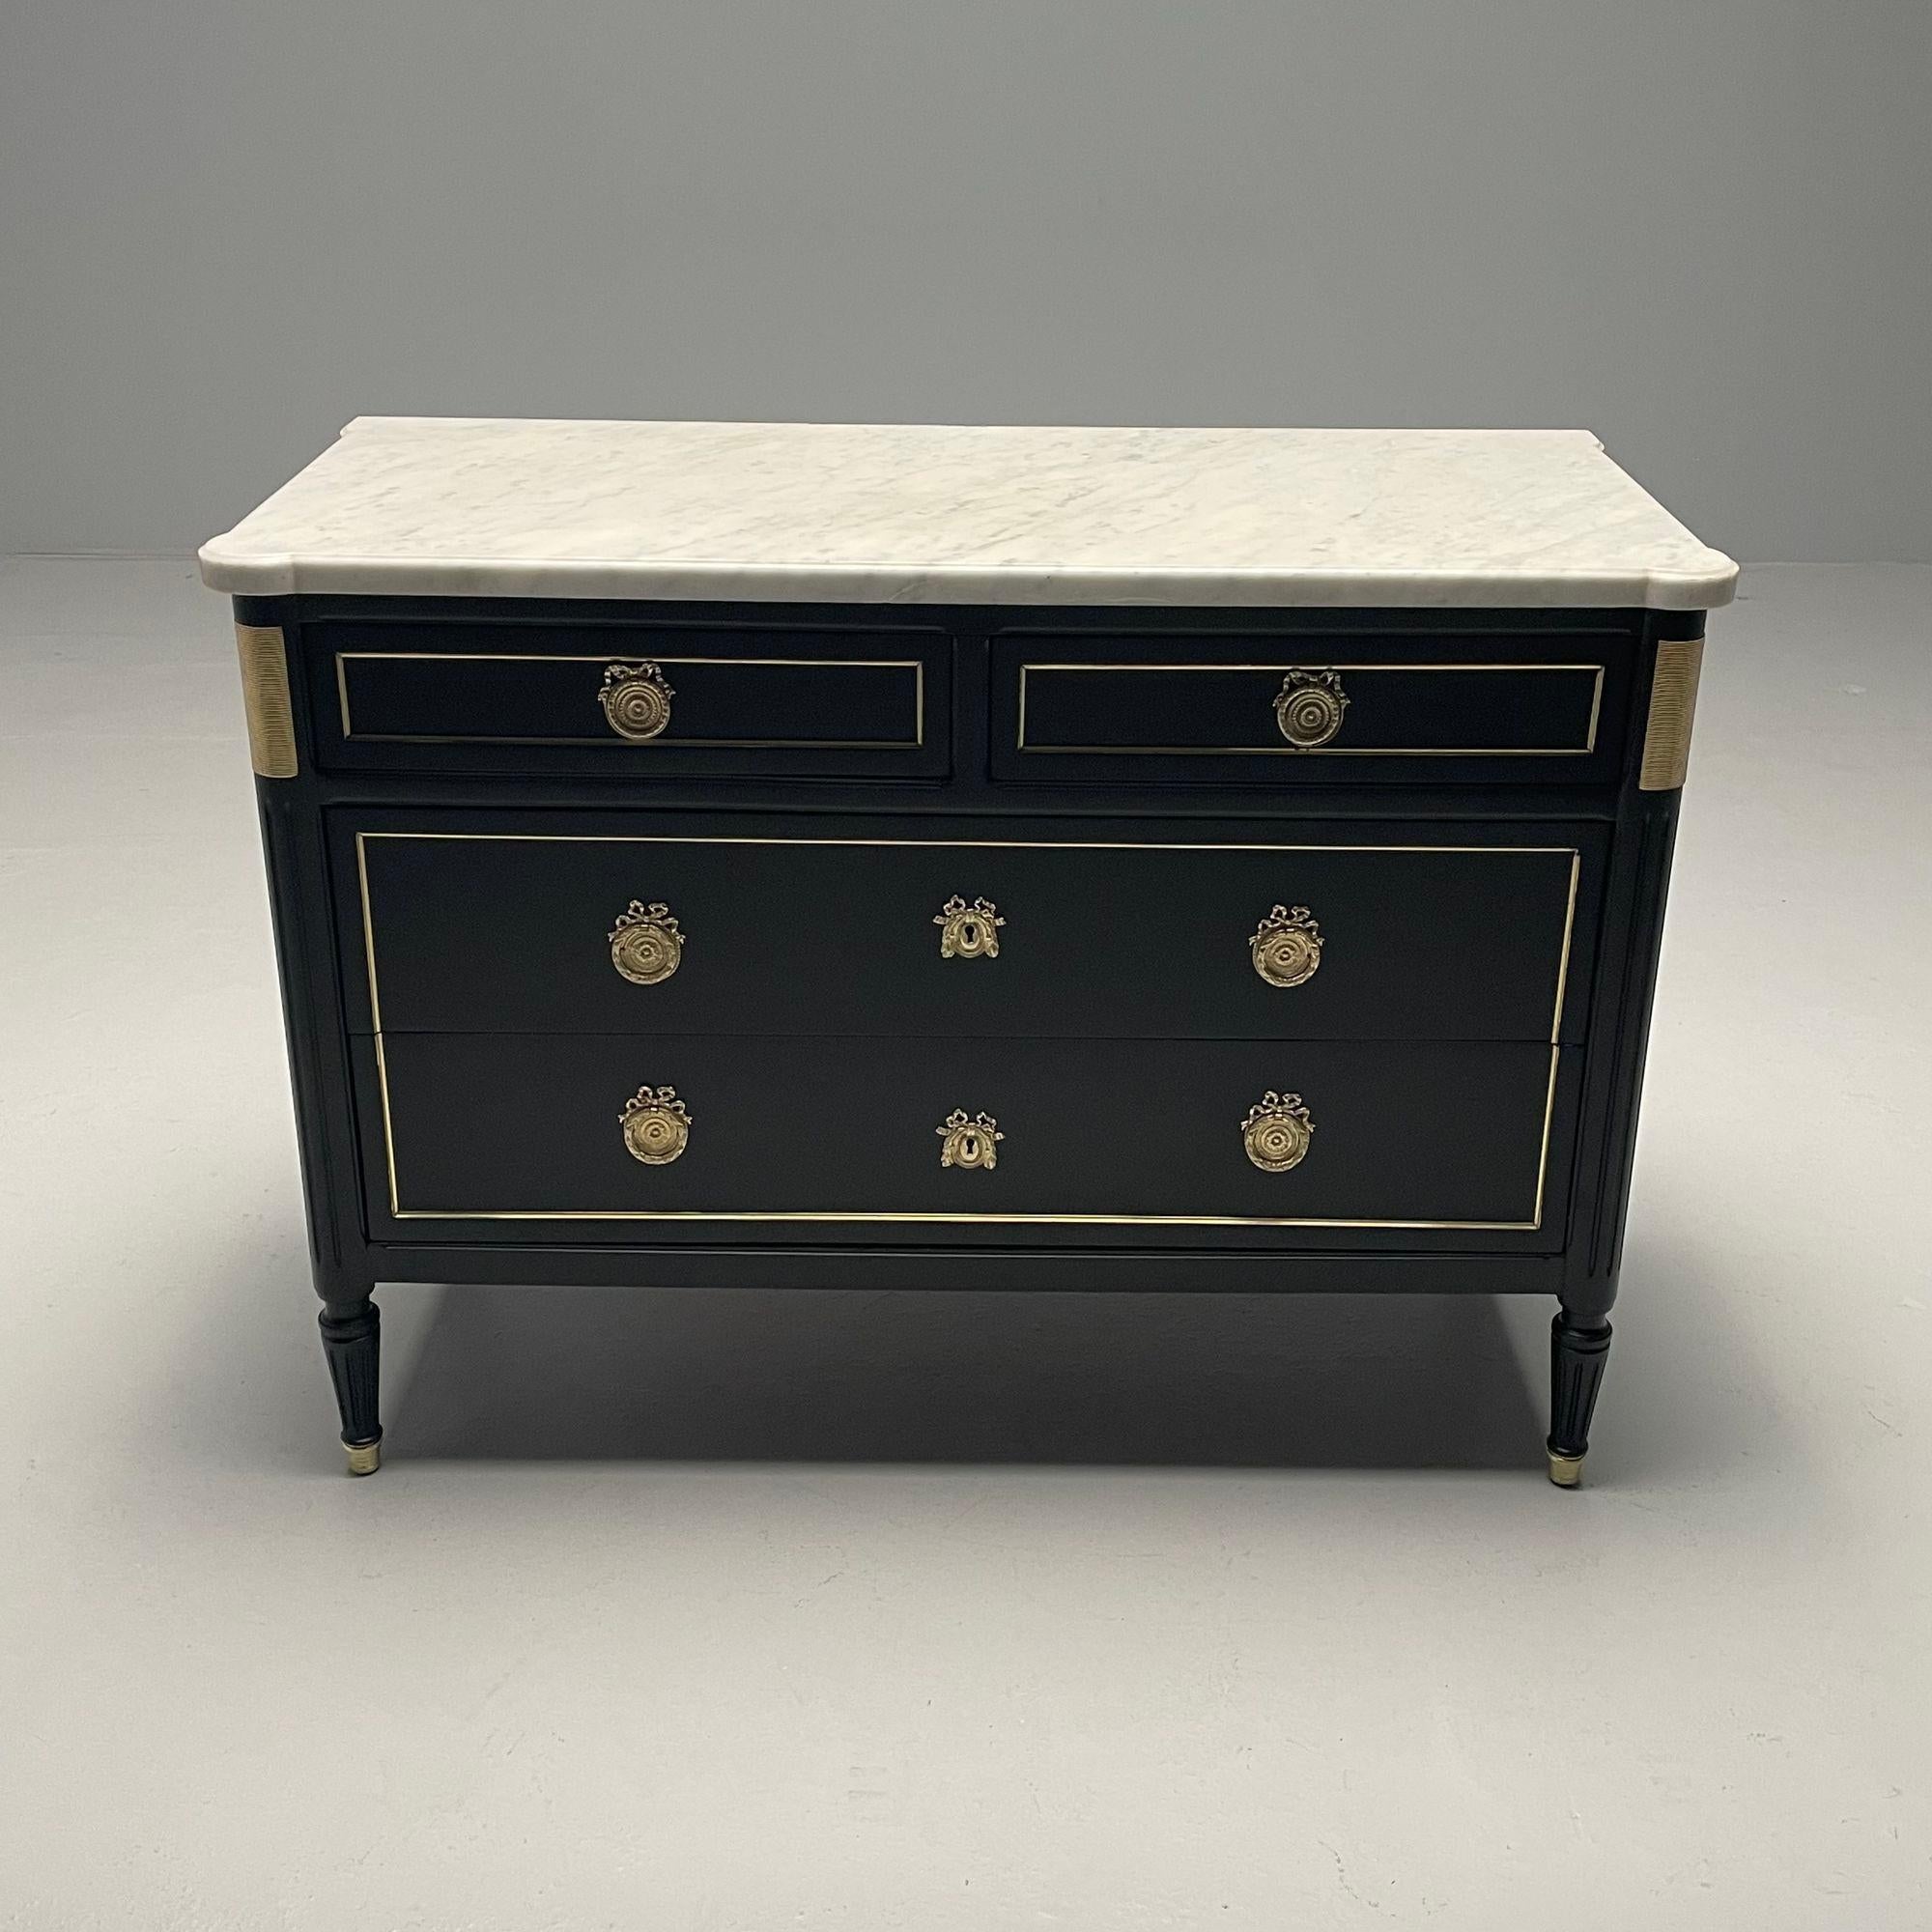 Maison Jansen, Hollywood Regency, Commode, Ebony, Marble, Bronze, French, 1950s

This fine French Commode or Chest of drawers, attributed to Maison Jansen, has been fully refinished to perfection. The Louis XVI style inspired profile with stout,